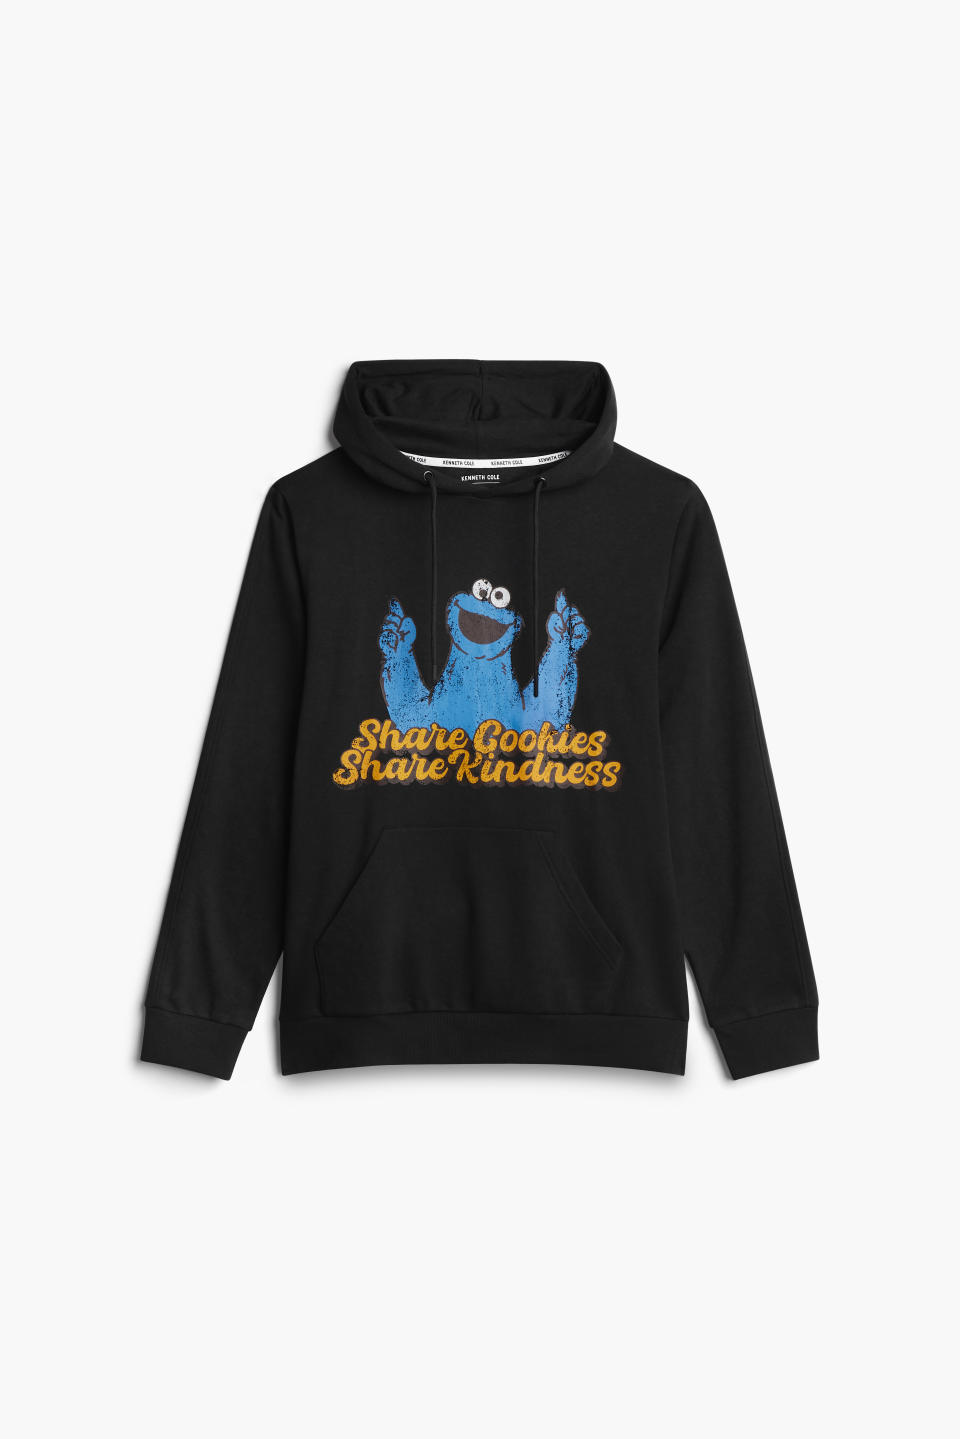 "Share Cookies, Share Kindness" hoodie from Kenneth Cole and Sesame Workshop.  